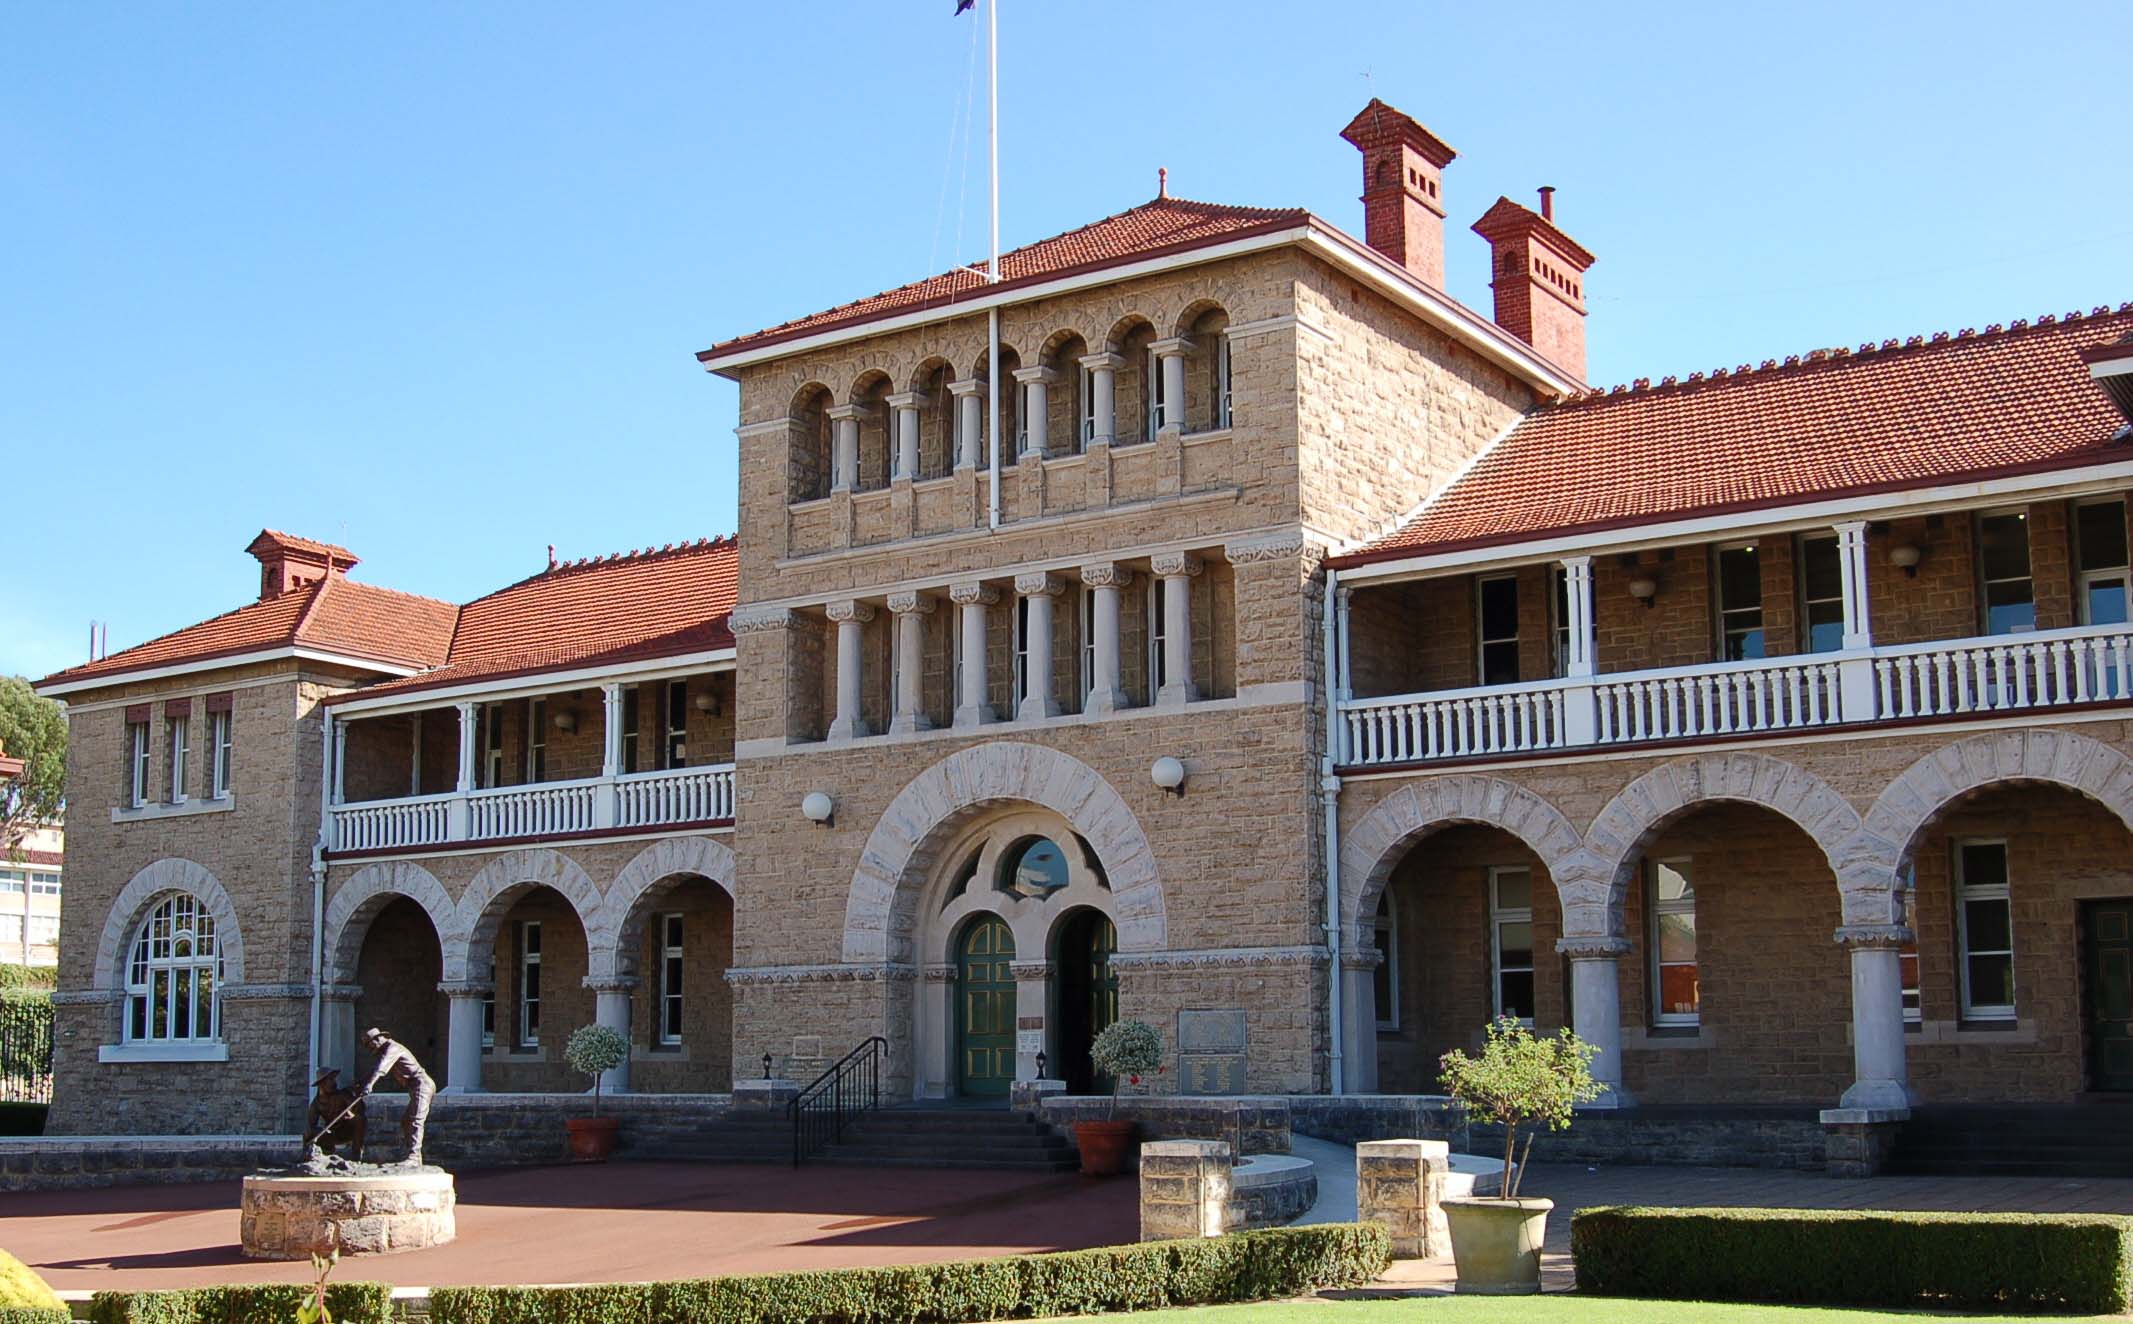 Learn About the Perth Mint